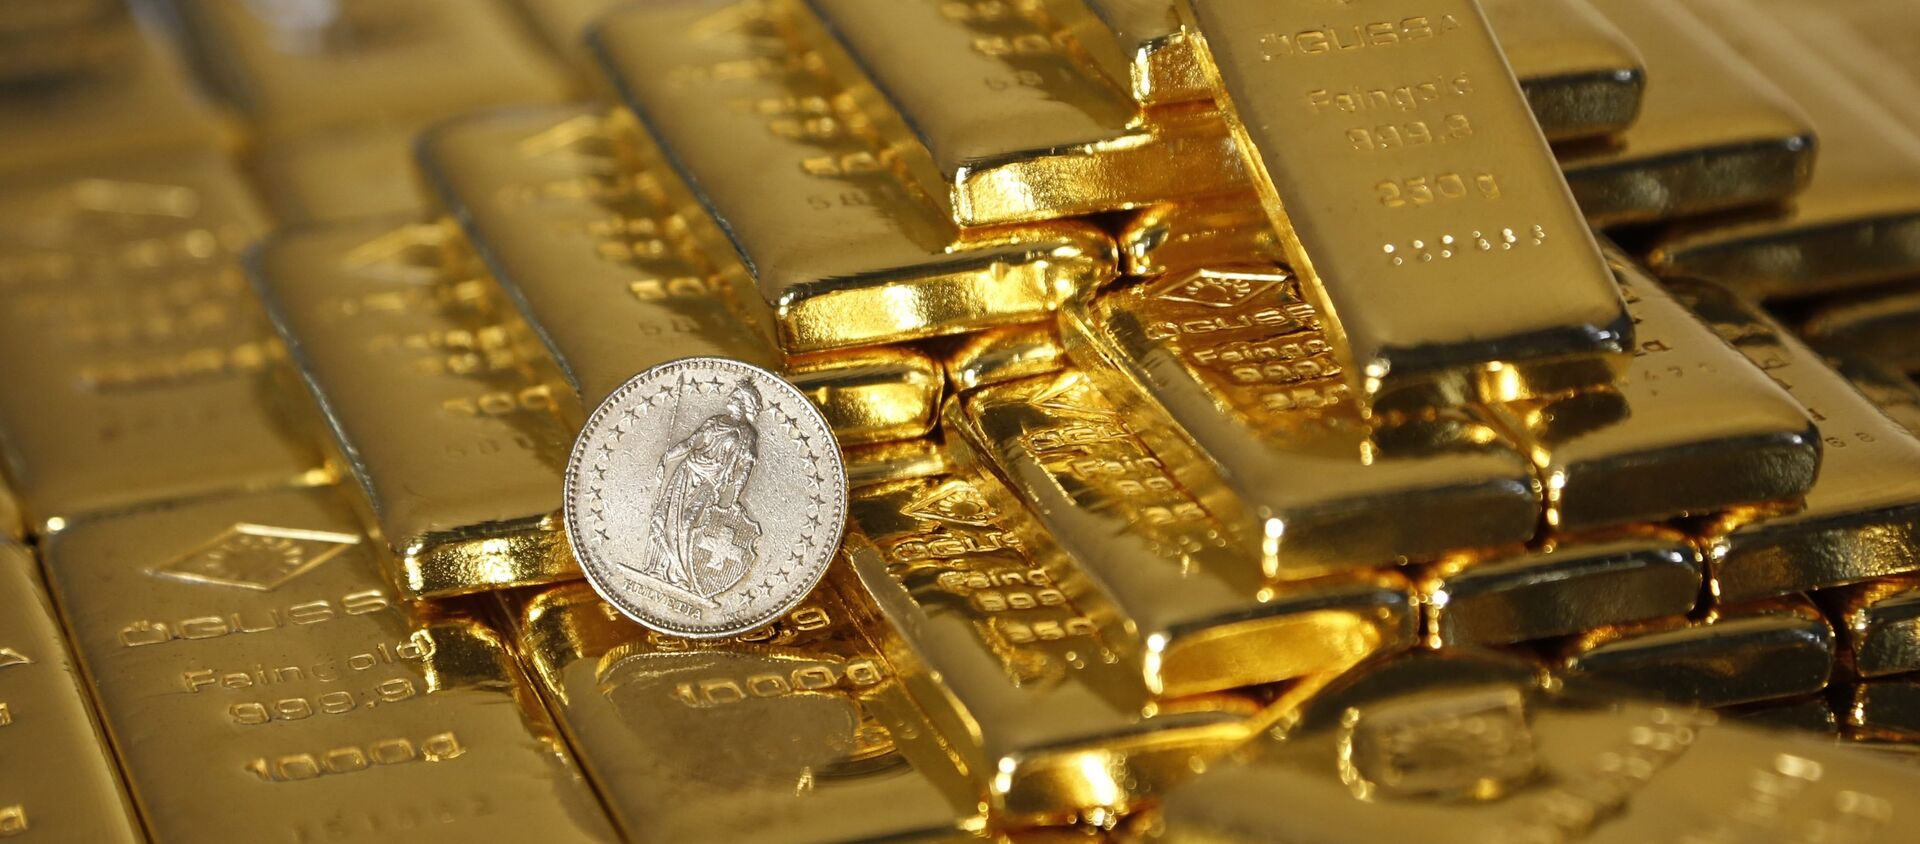 Gold bars and a Swiss Franc coin are seen in this illustration picture taken at the Austrian Gold and Silver Separating Plant 'Oegussa' in Vienna, 7 November 2014 - Sputnik International, 1920, 17.05.2021